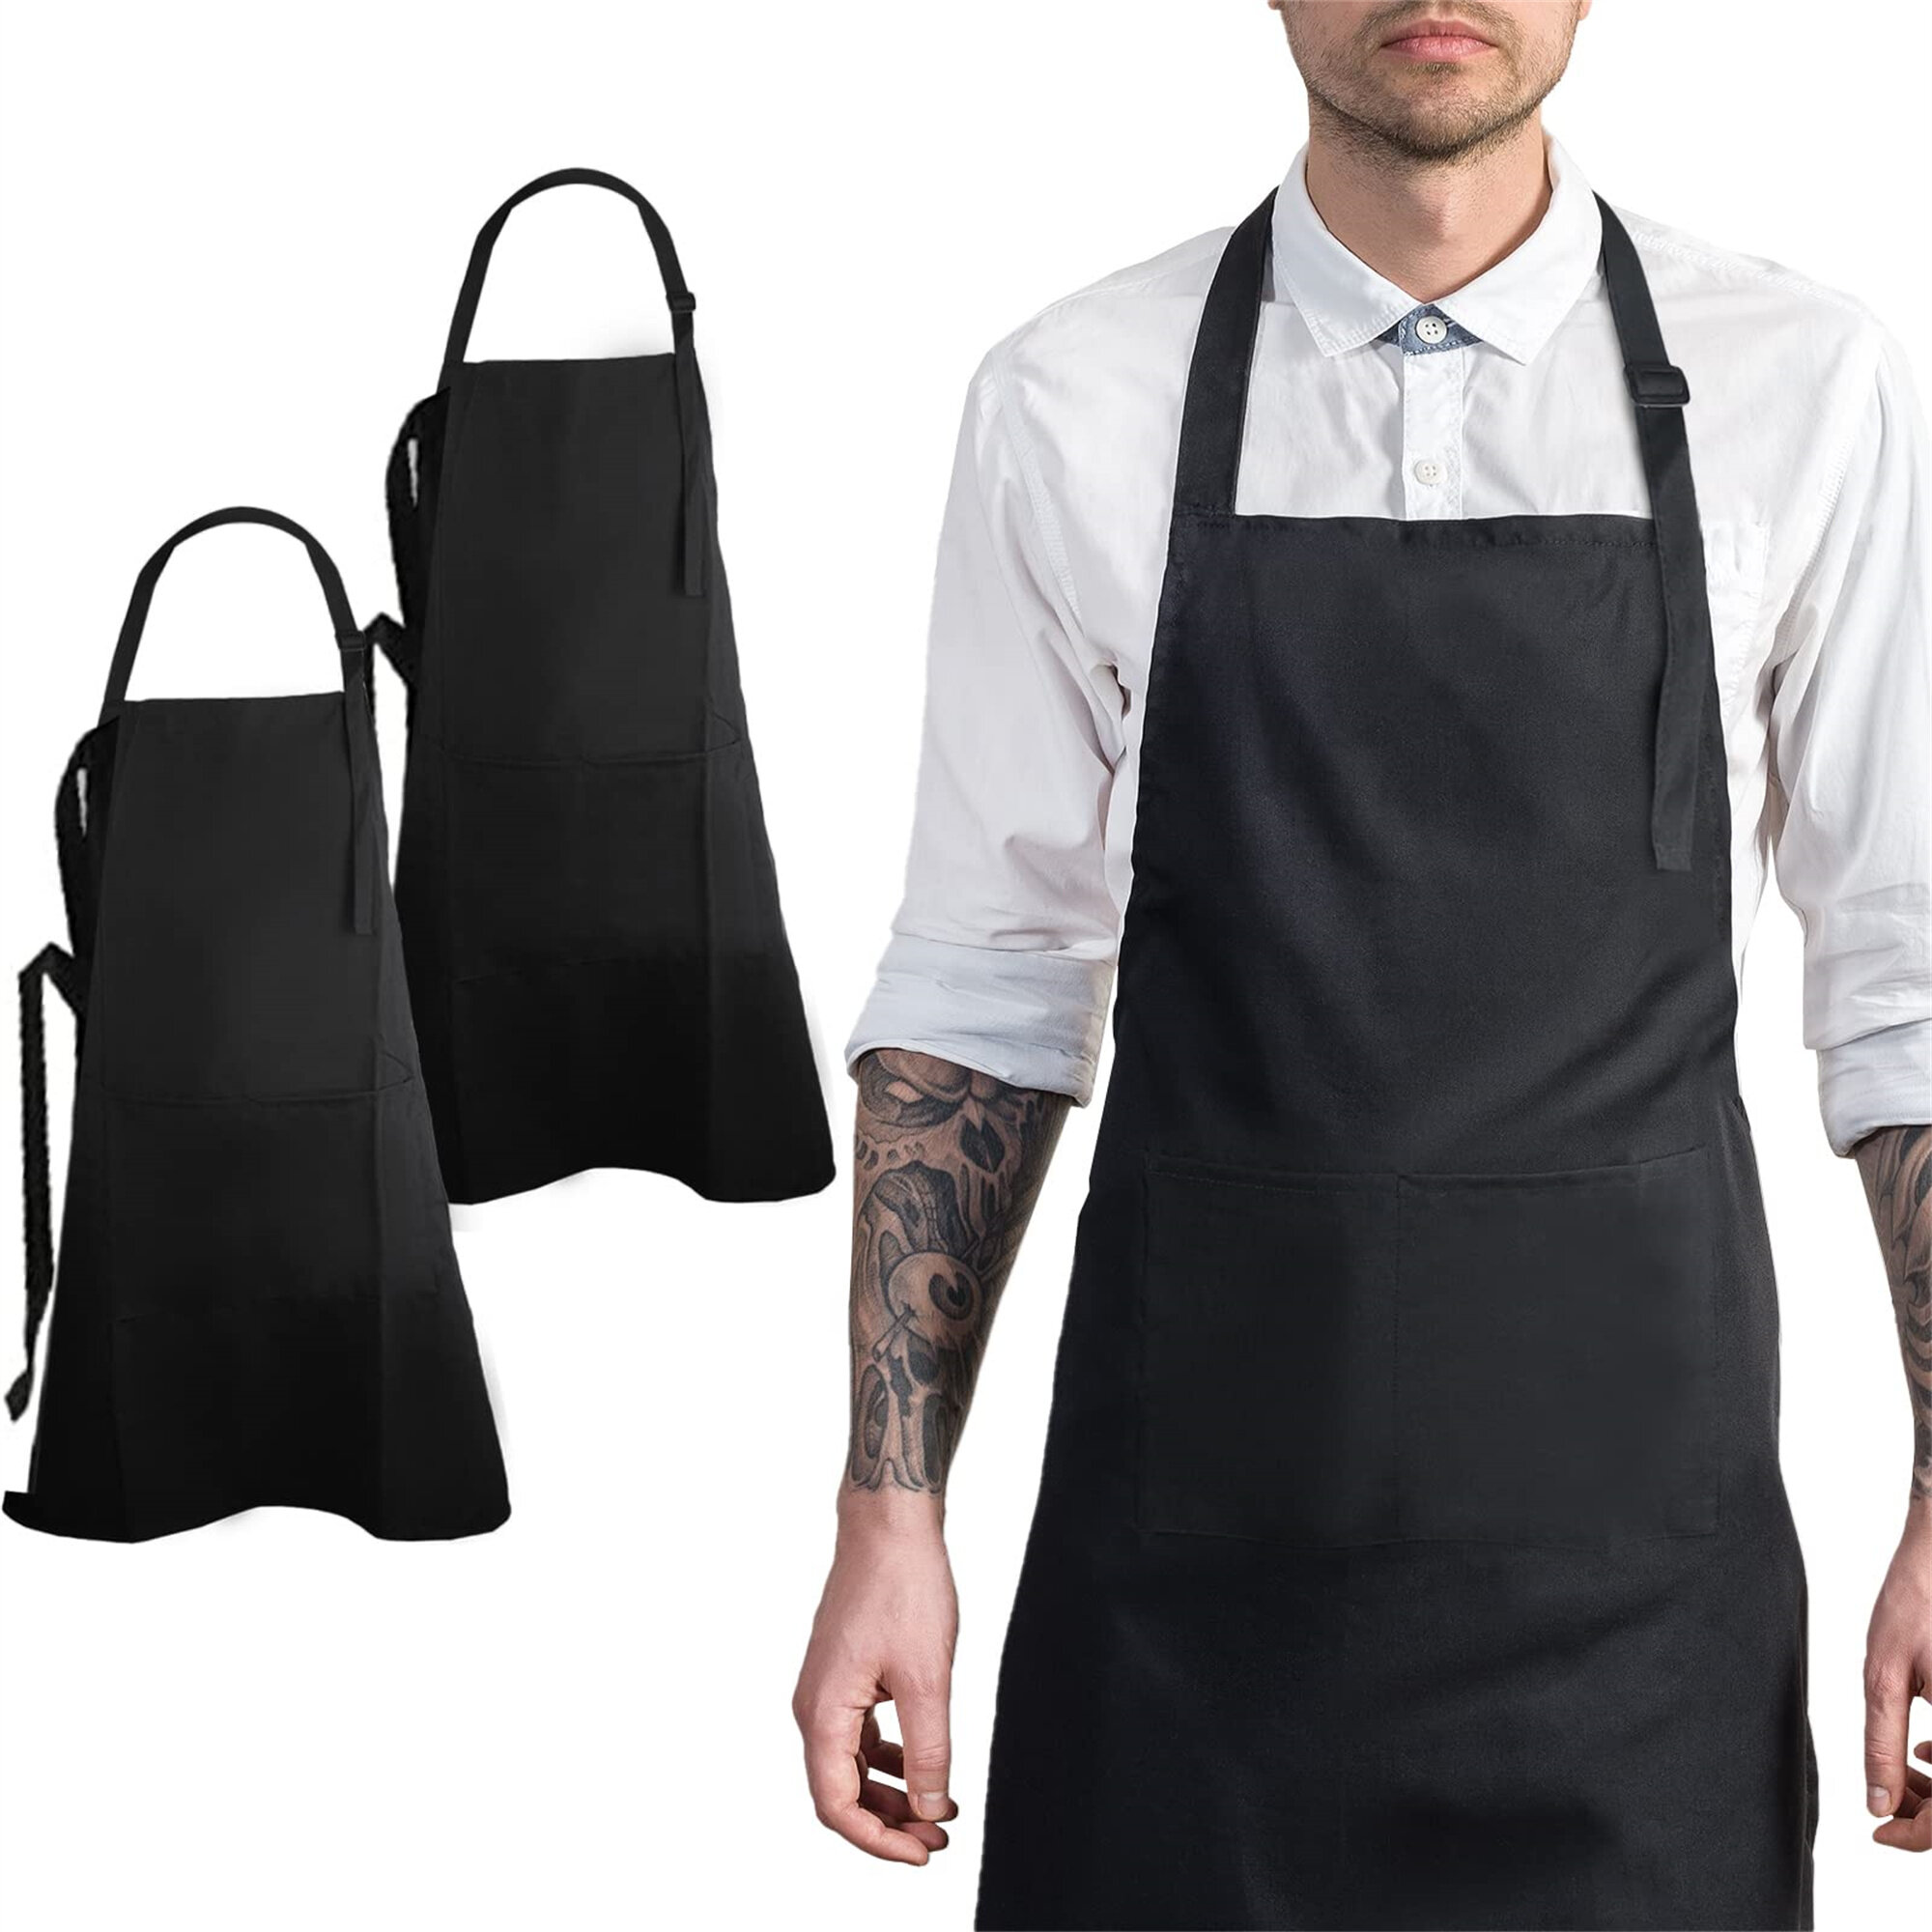 Leather Apron Kitchen Adult Waterproof Cooking Baking Aprons Adjustable+pockets